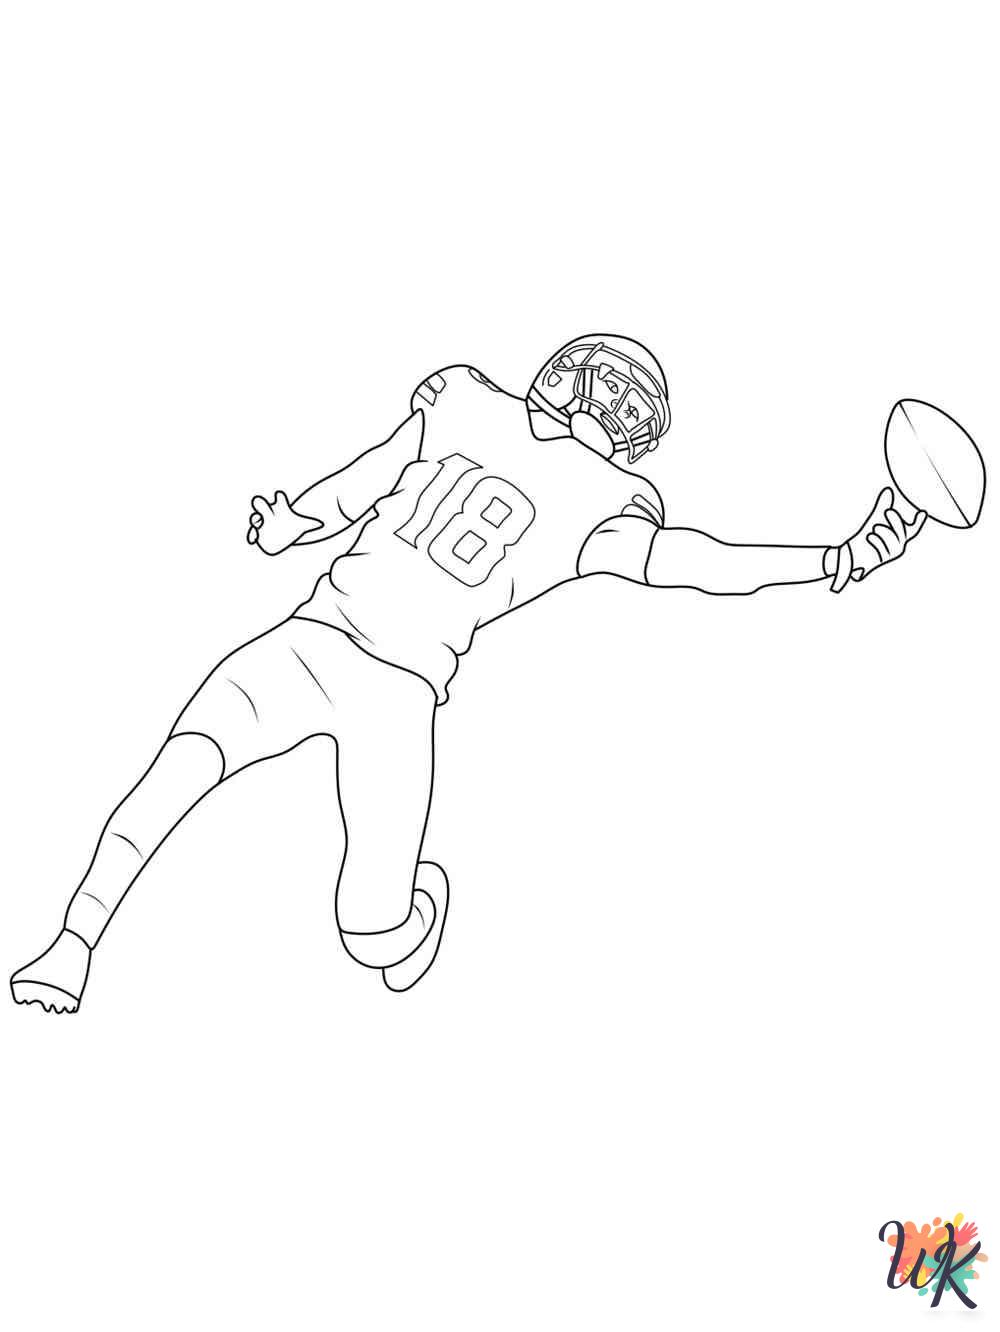 Justin Jefferson printable coloring pages